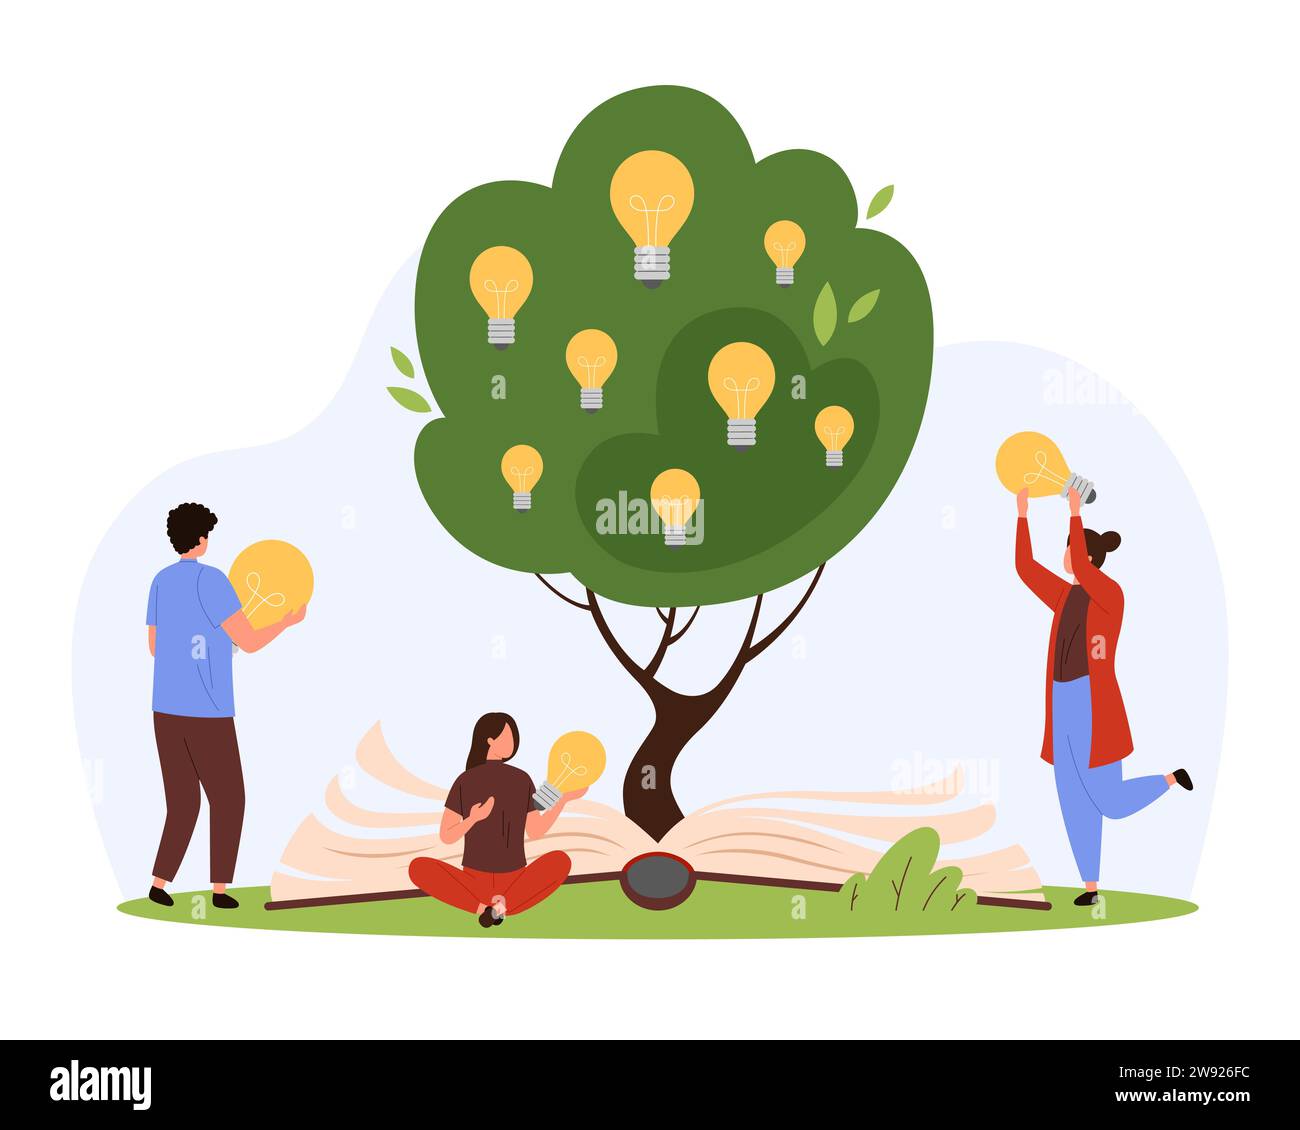 Knowledge tree growing from open paper book, new creative ideas and inspiration from studying. Tiny people holding light bulbs, wisdom from reading library literature cartoon vector illustration Stock Vector